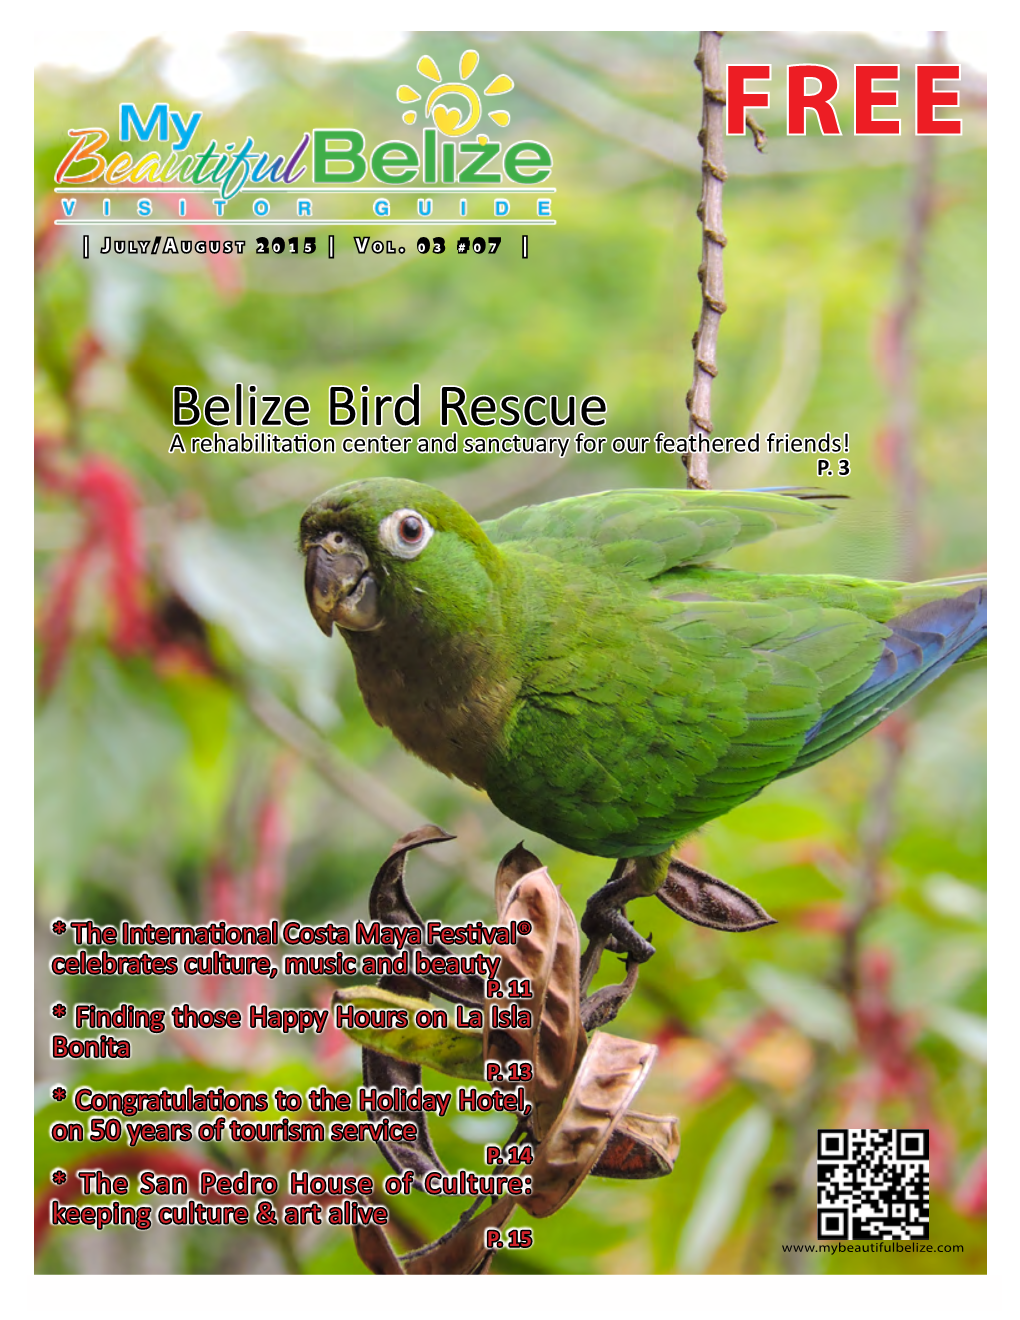 Belize Bird Rescue a Rehabilitation Center and Sanctuary for Our Feathered Friends! P